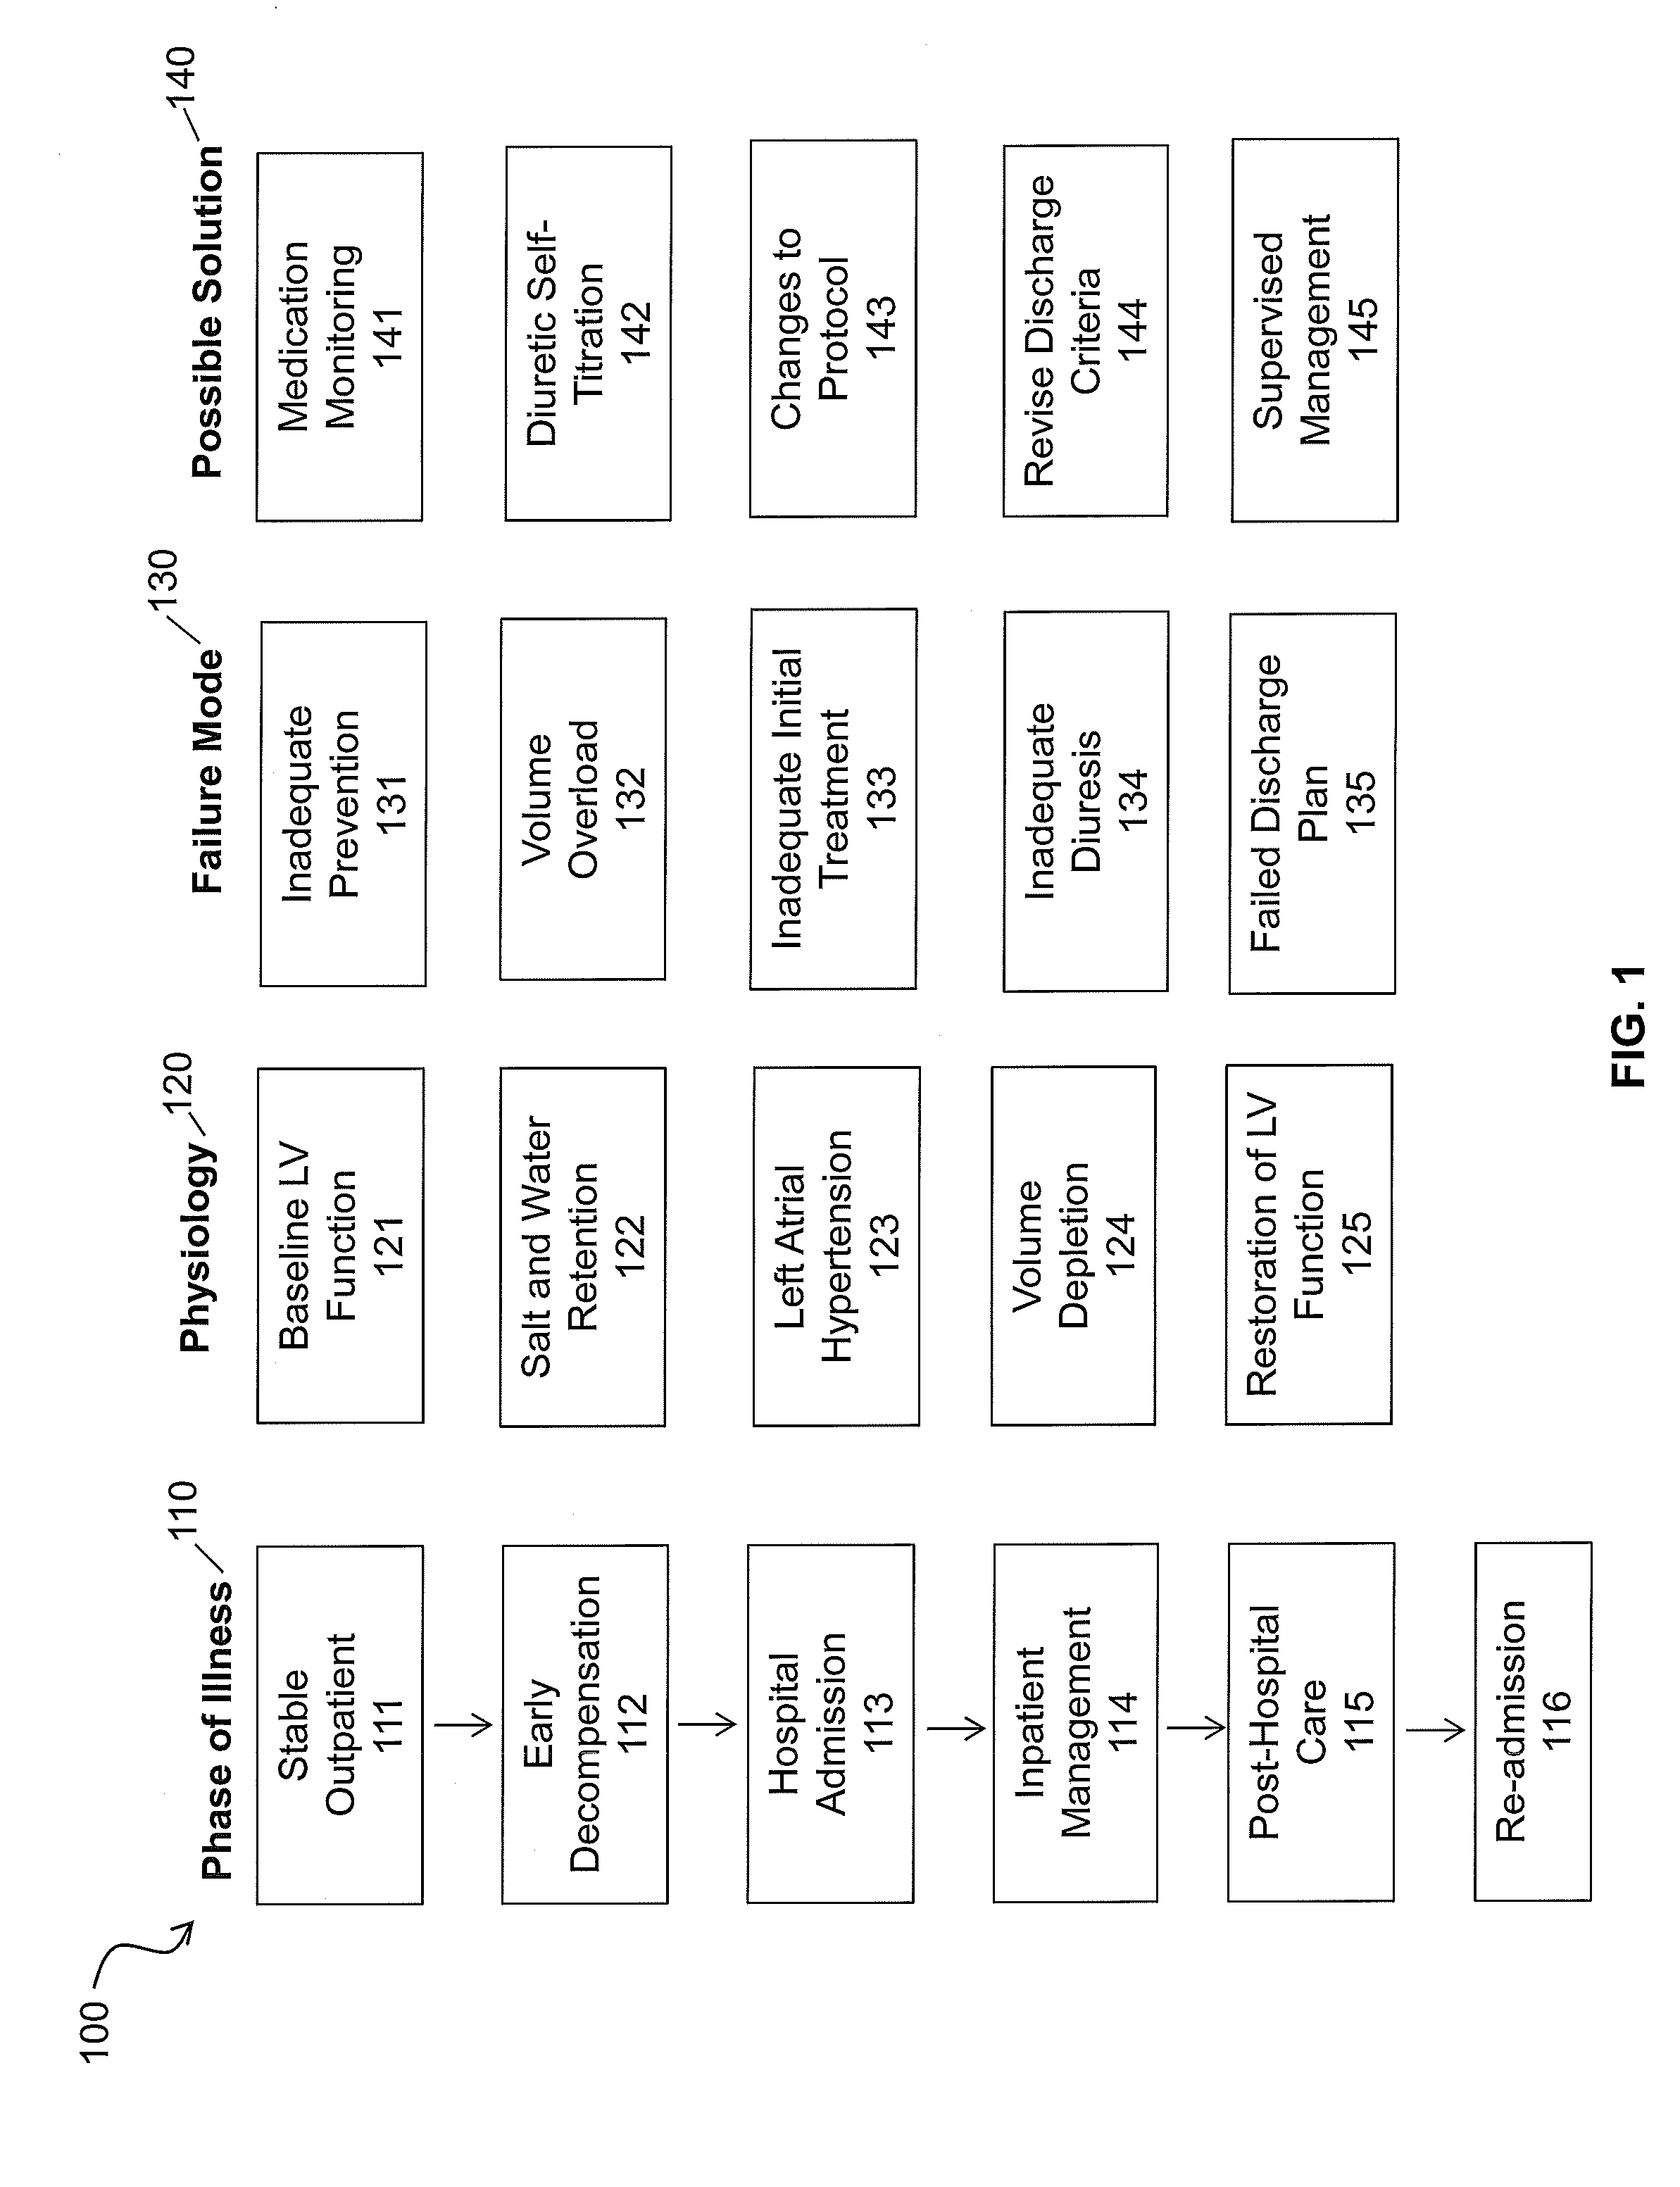 System and methods for managing congestive heart failure